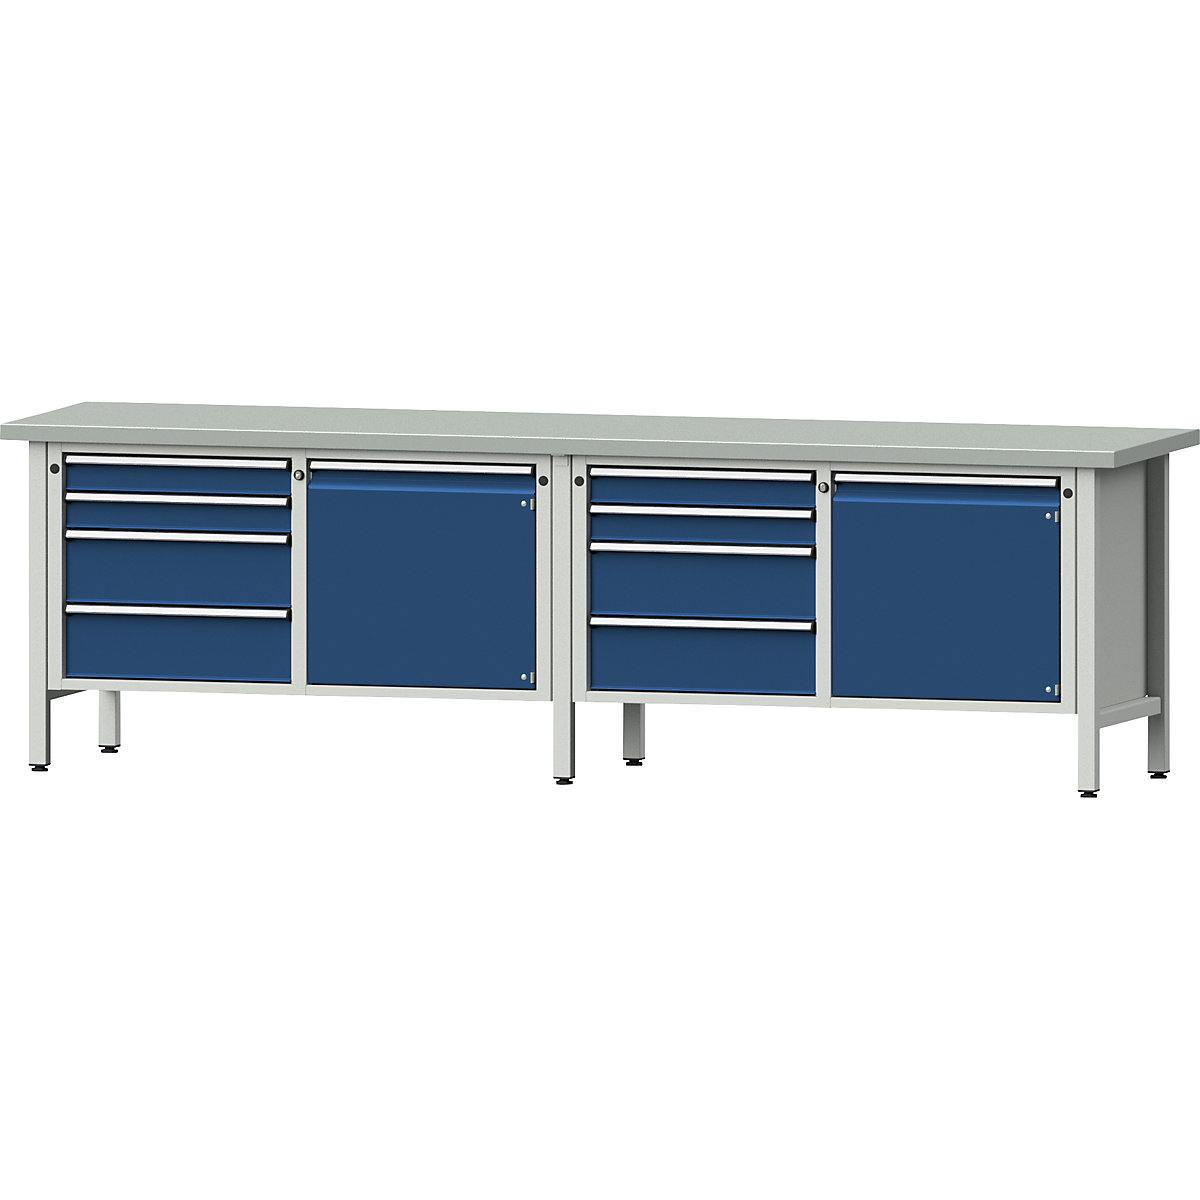 Workbench width 2800 mm, frame construction – ANKE, 2 doors, 8 drawers with full extension, sheet steel covered worktop-9